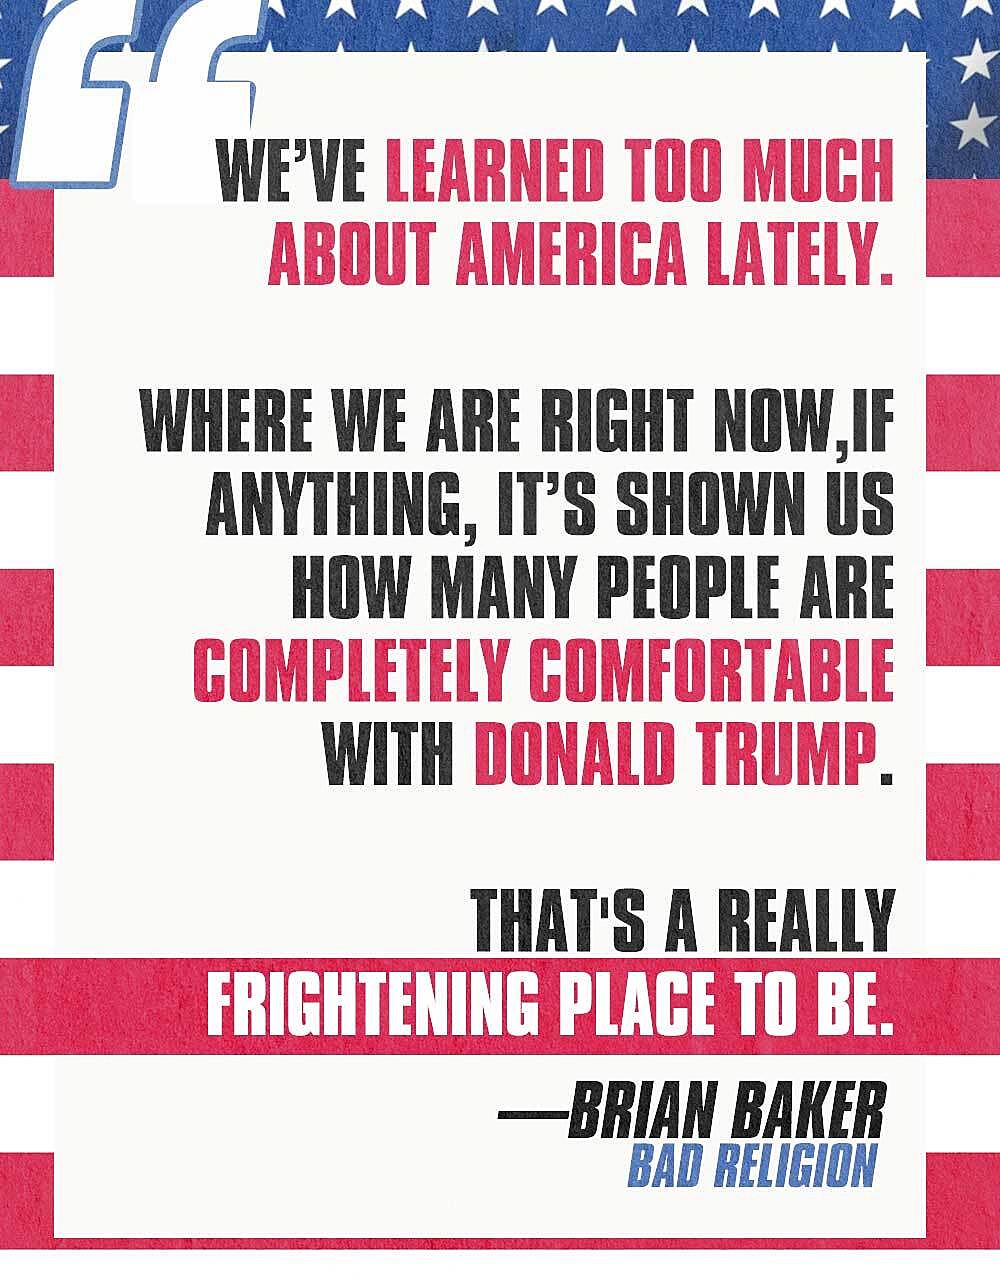 brian baker pull quote